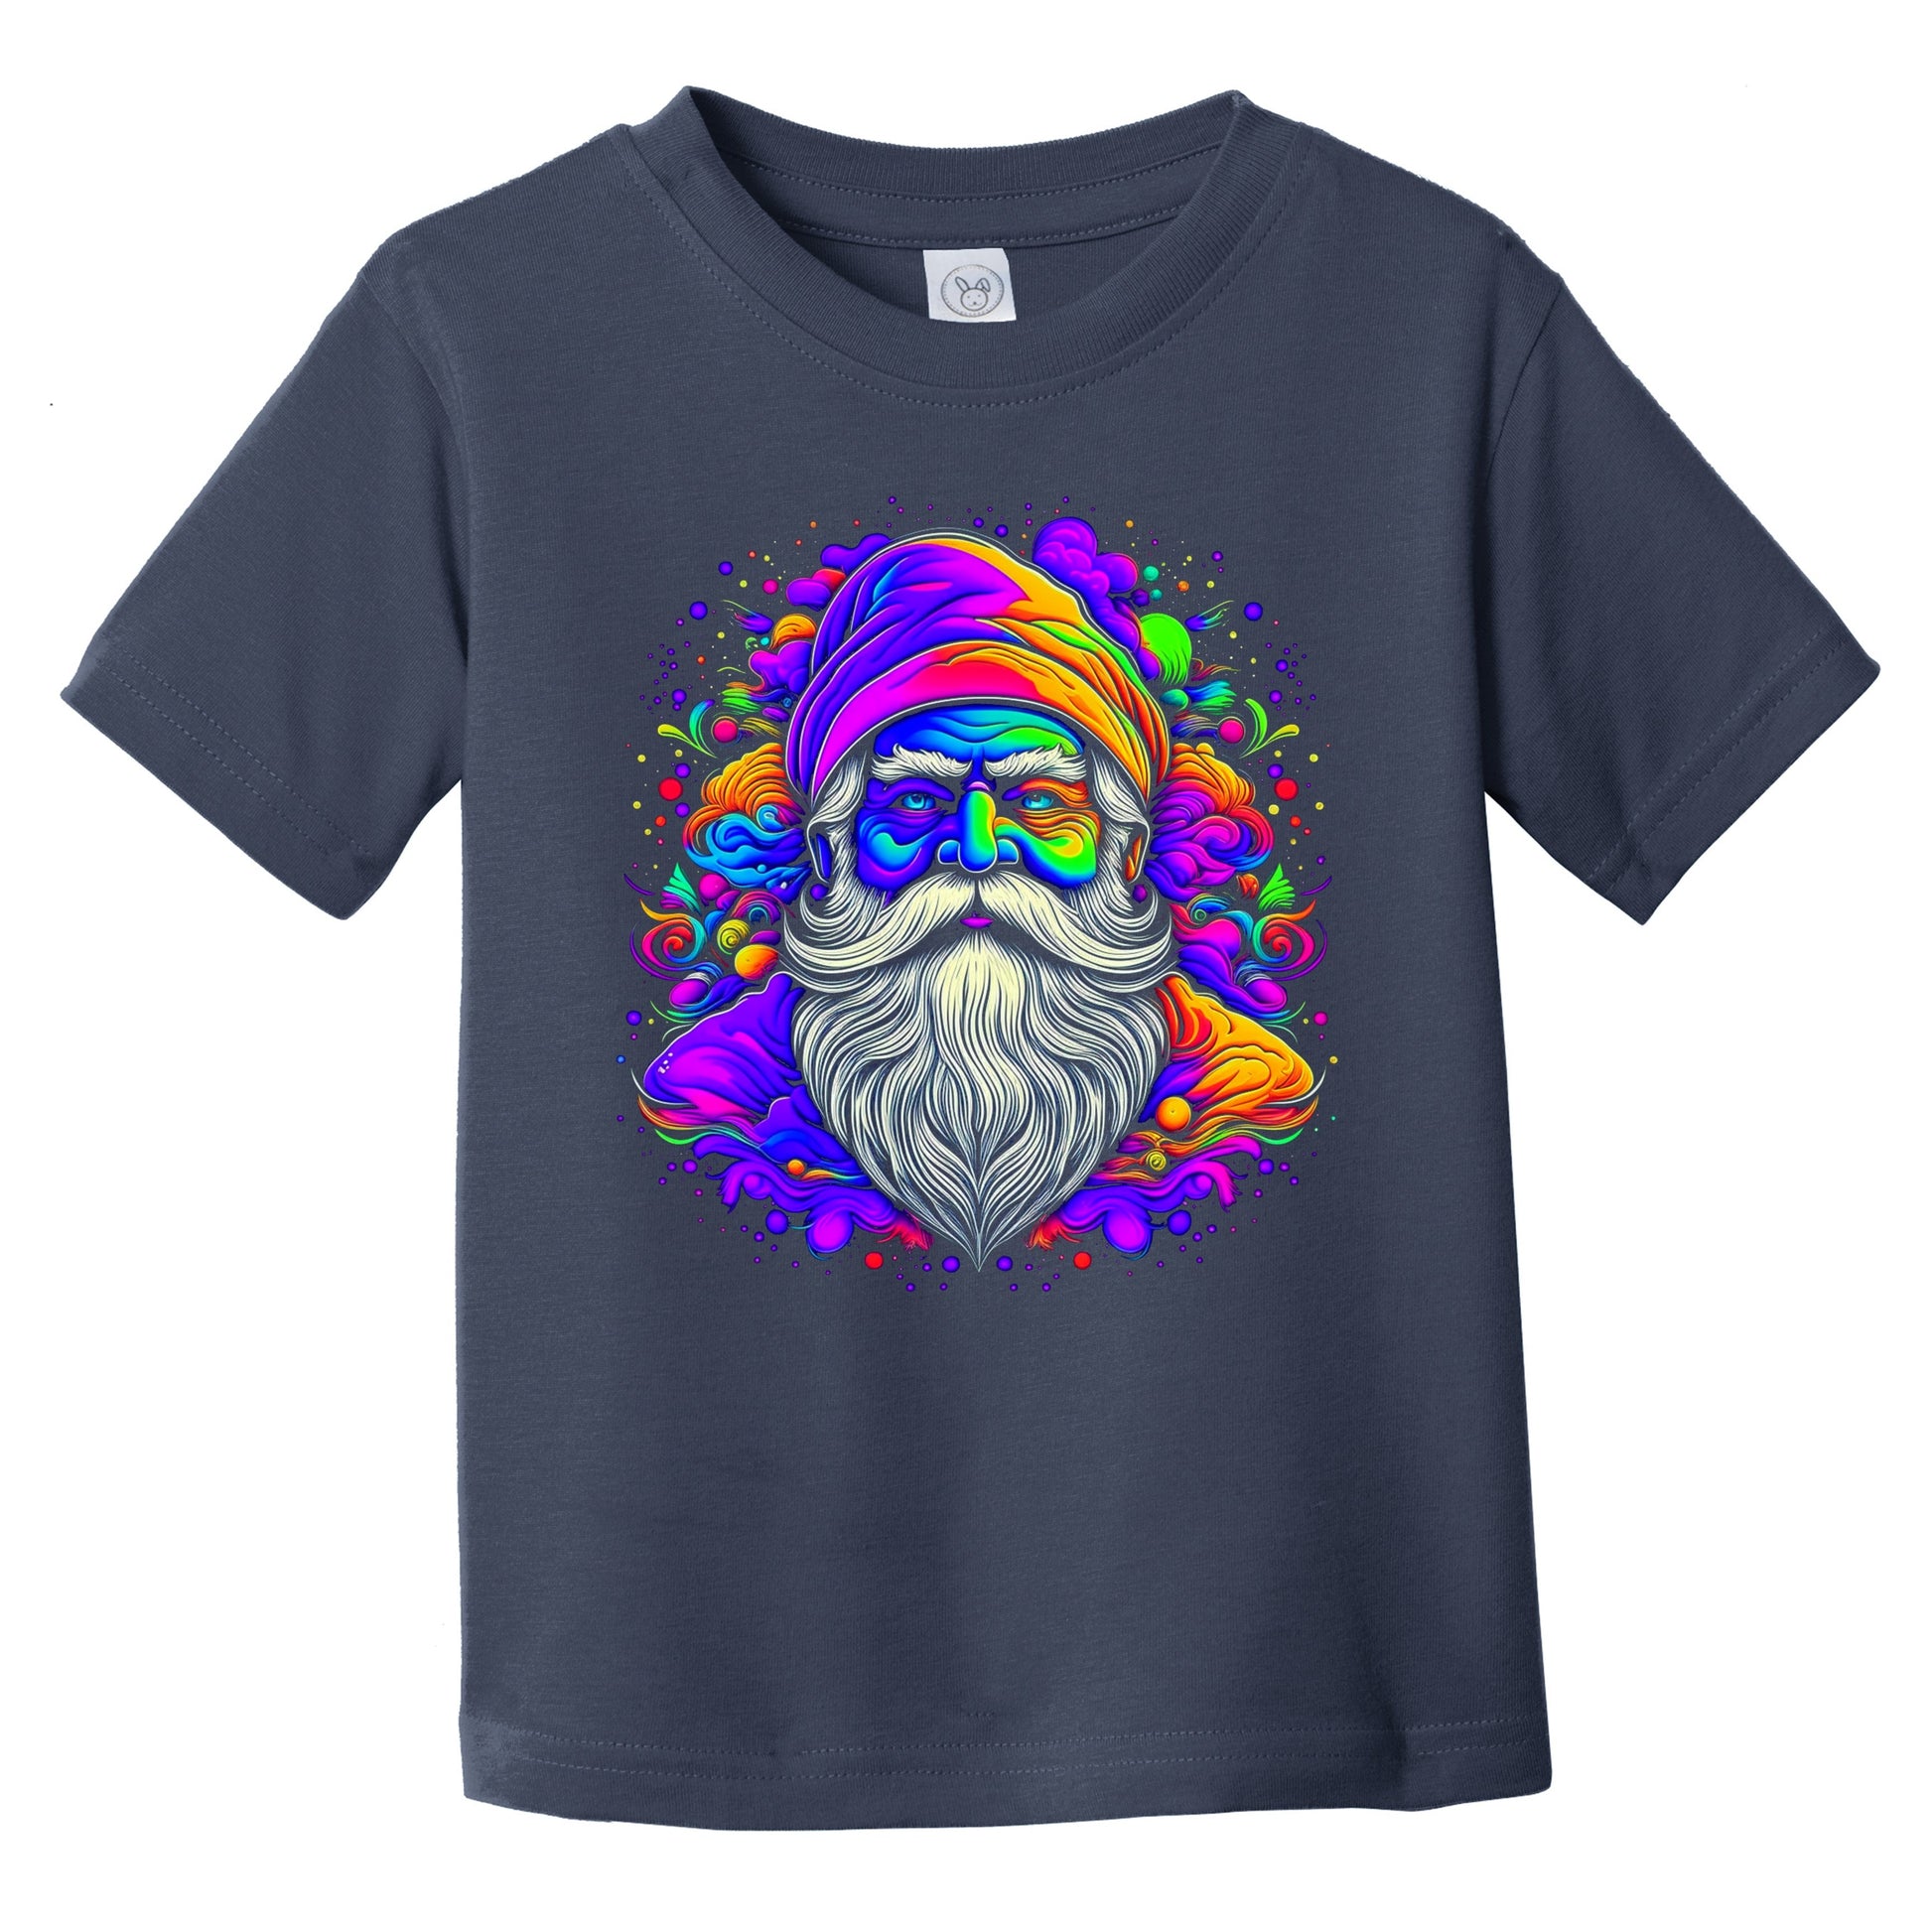 Colorful Bright Santa Claus Psychedelic Christmas Art Infant Toddler T-Shirt